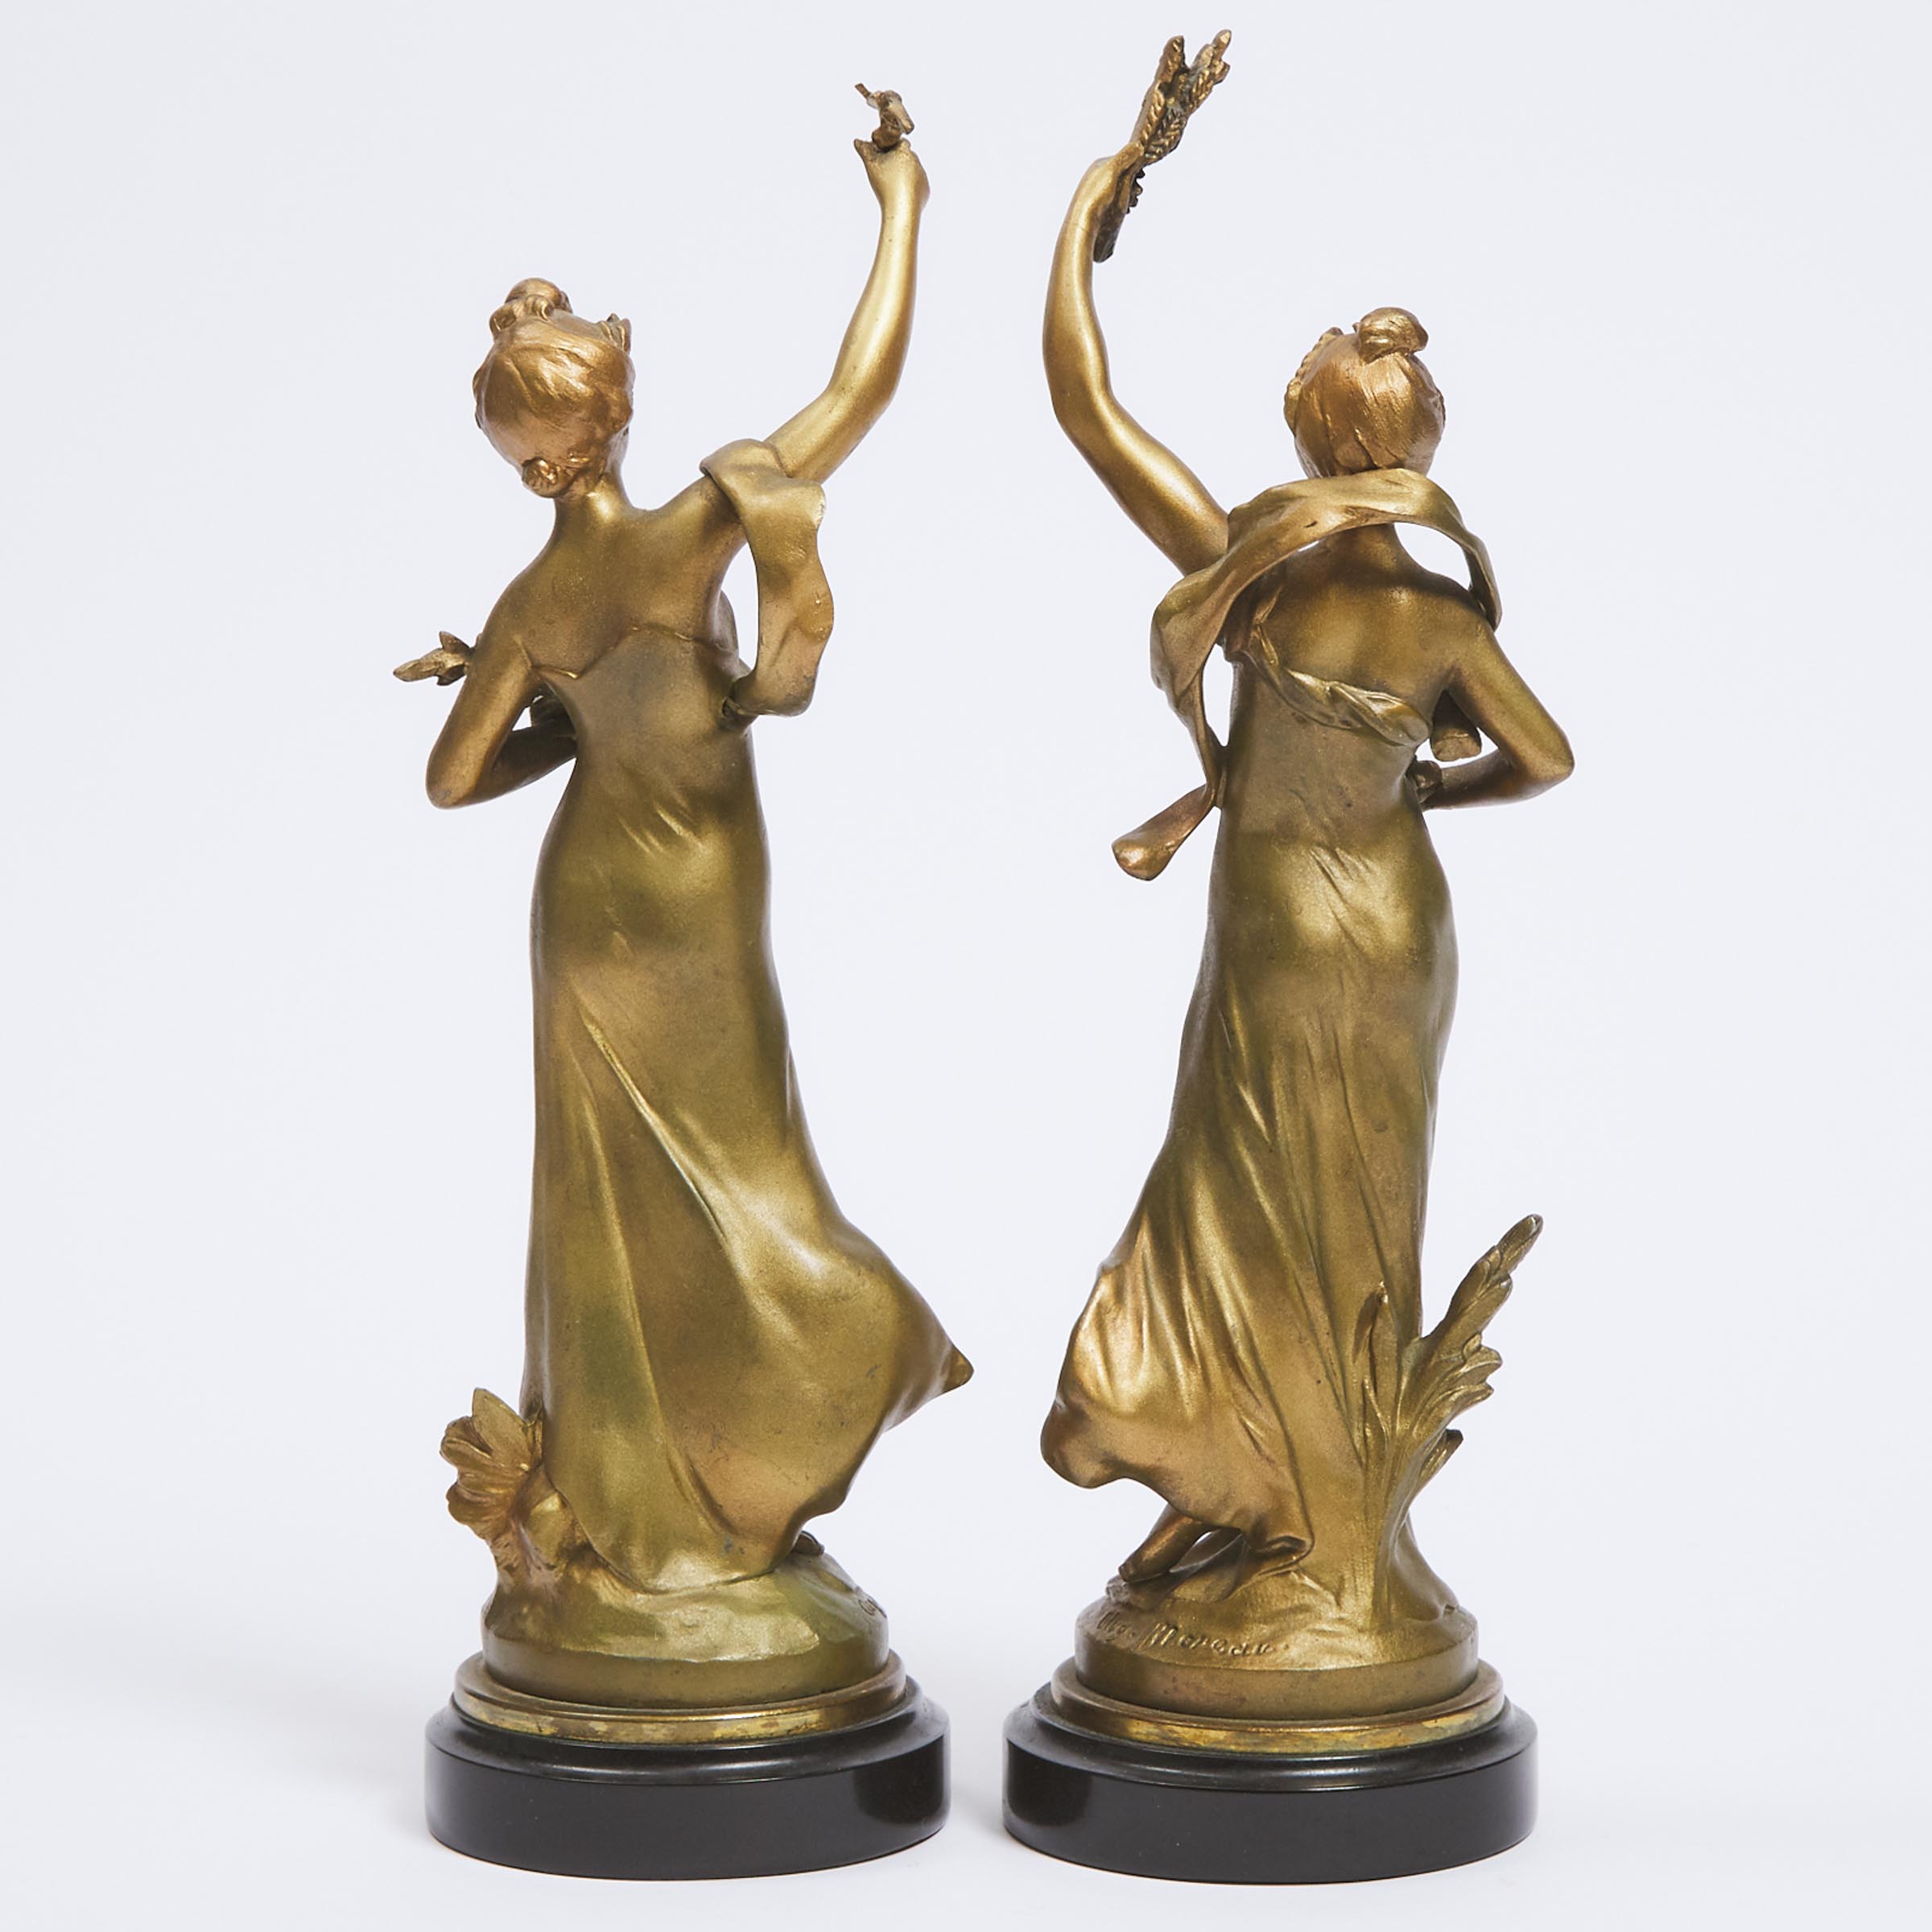 Pair of French Gilt Bronze Figures Titled 'Pax' and 'La Terre', after Moreau, mid 19th century